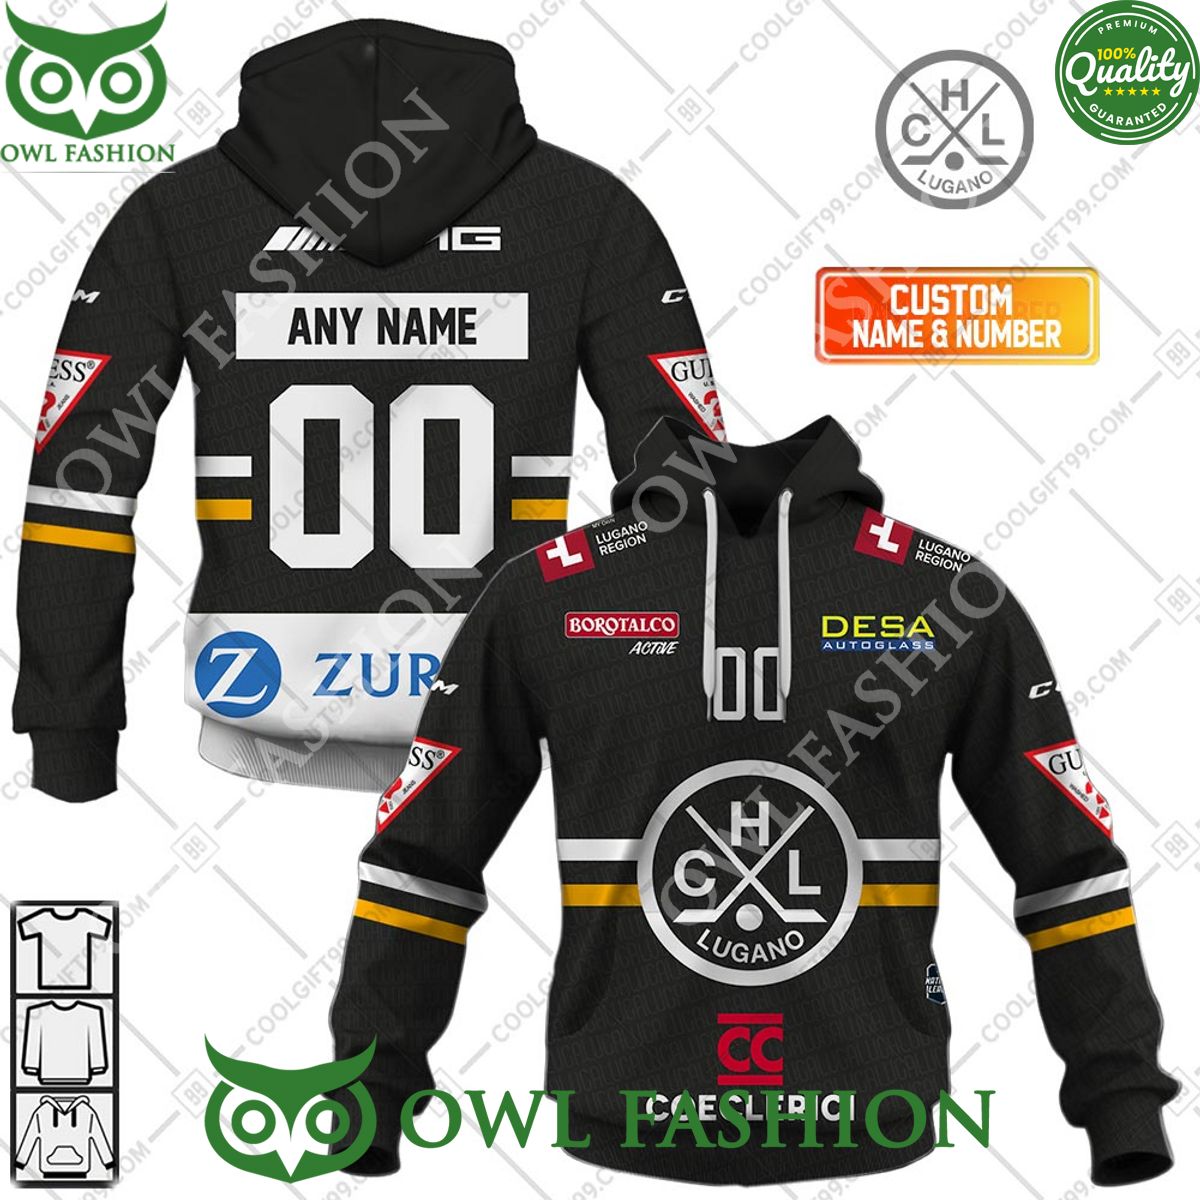 personalized name and number nl hockey hc lugano home jersey style printed hoodie shirt 1 iSJFx.jpg